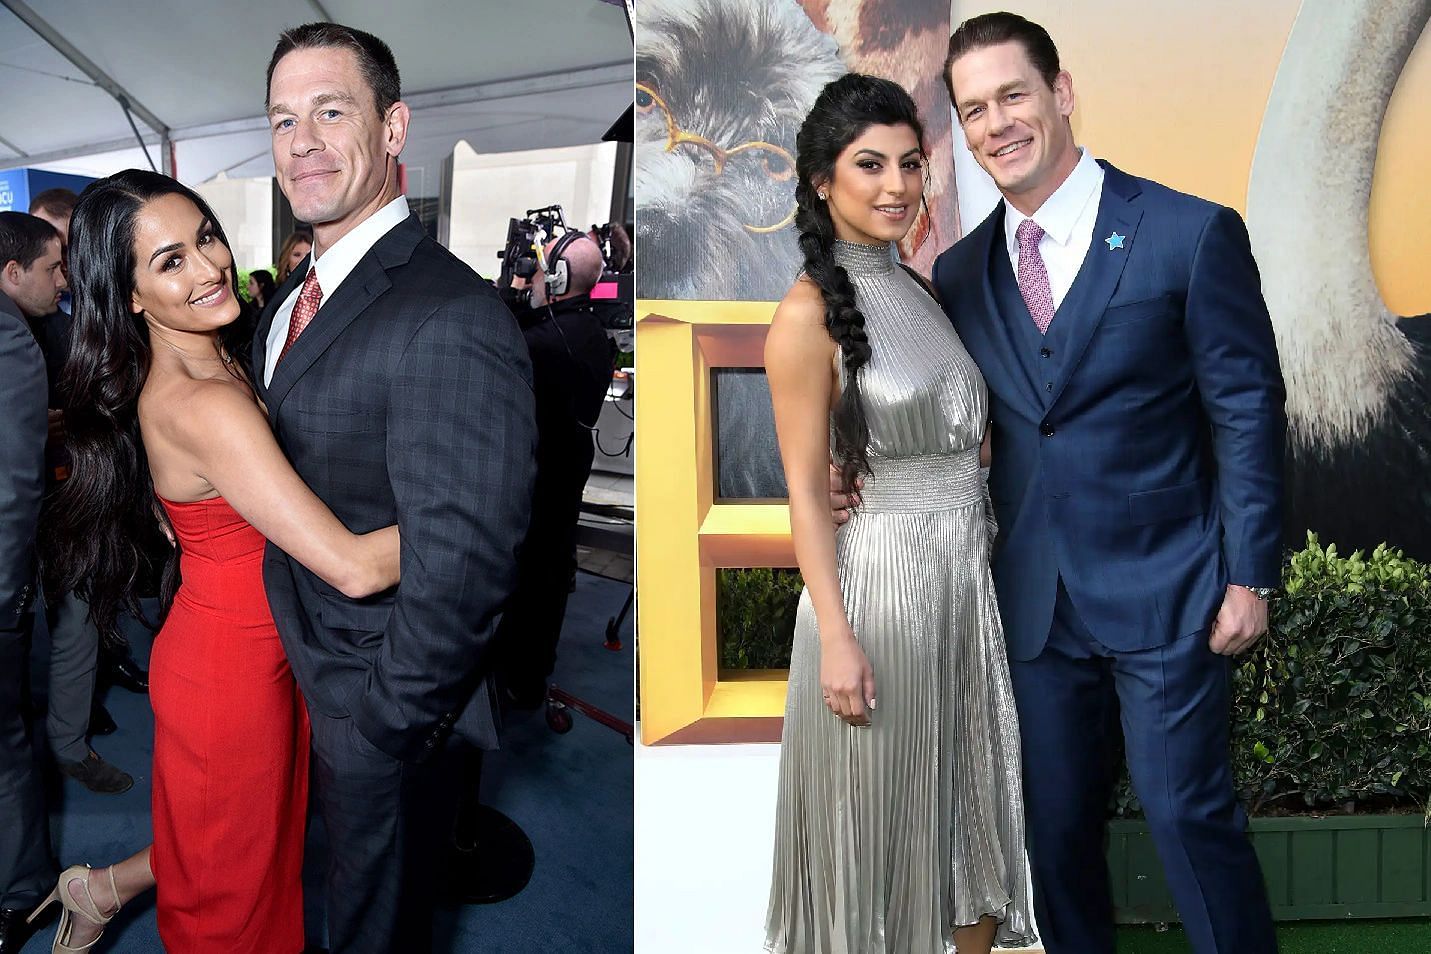 John Cena has been linked to many women throughout his career